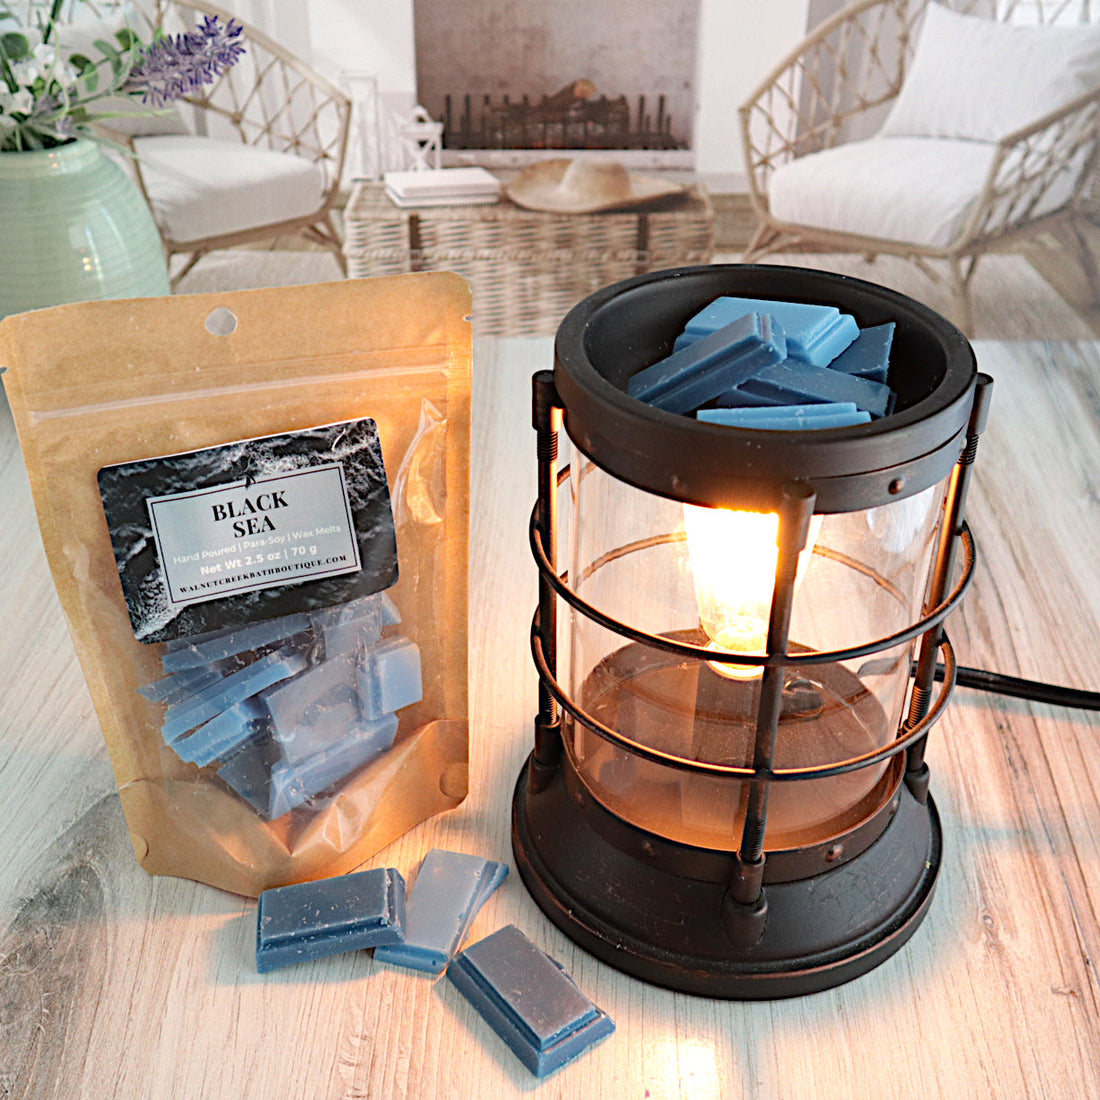 black sea wax melts are light blue and dark blue in color. there is a lit burner filled with these pieces just getting ready to melt. next to this to the left is a bag full of the cute little pieces of waxy goodness!  this is all sitting on a washed out wooden base with a couple of chairs in the background next to a fireplace